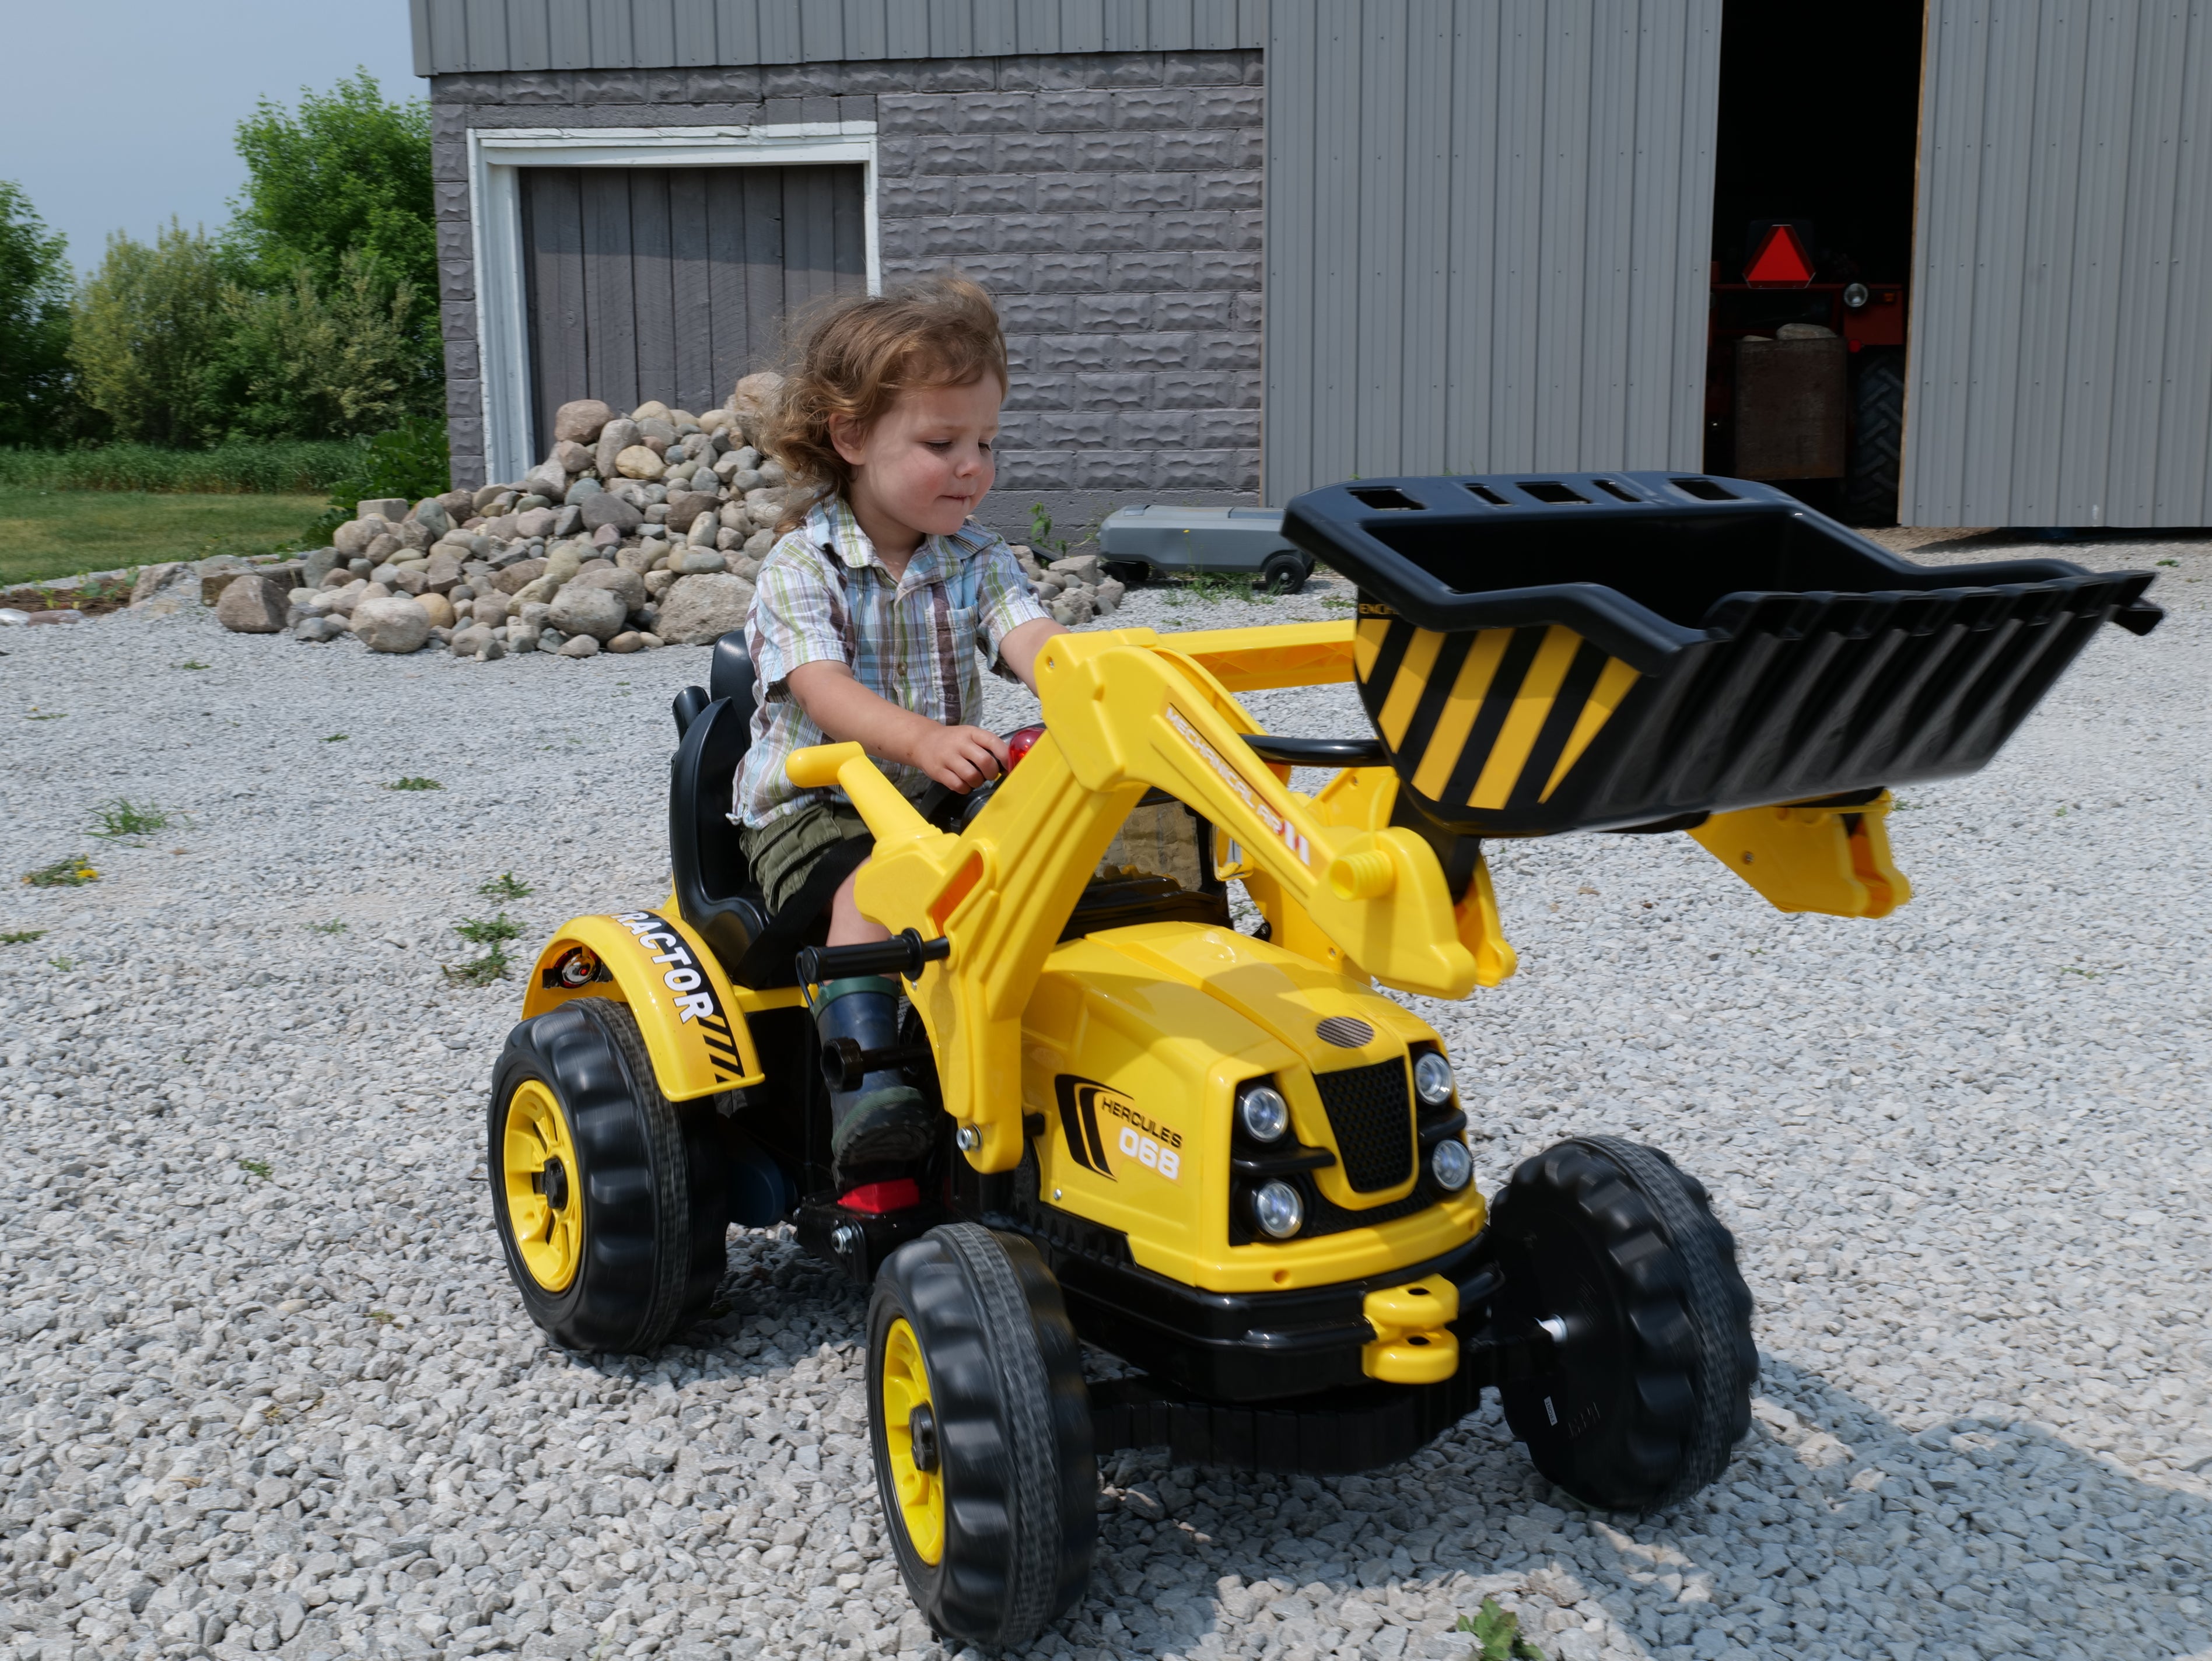 Kidsera Kids Ride on Tractor with Front Loader, 12V 7AH Battery Powered Riding On Excavator